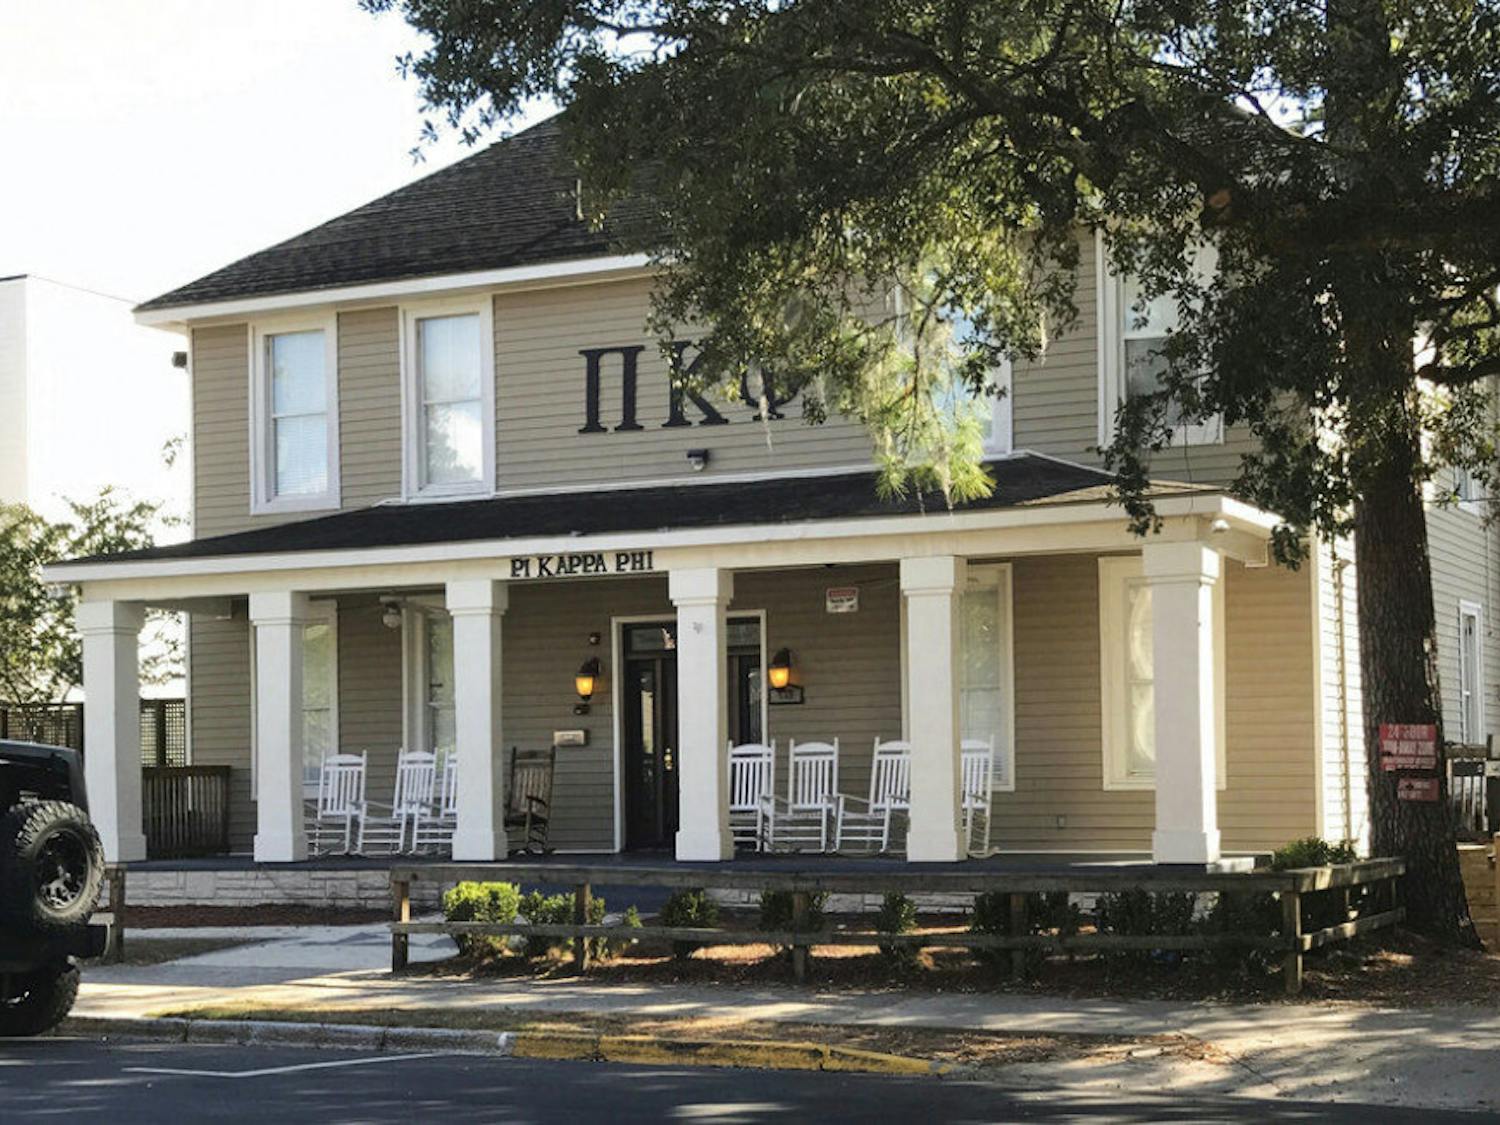 FILE - This Nov. 7, 2017 file photo shows the Pi Kappa Phi fraternity house near Florida State University in Tallahassee, Fla. Andrew Coffey should have been graduating from Florida State University with his classmates this May 2019, but his life was cut short when he was pressured into drinking an entire bottle of 101-proof Wild Turkey bourbon in a Pi Kappa Phi fraternity hazing ritual. Now his parents are pleading the Florida Legislature to pass a bill that expands the state's anti-hazing laws.&nbsp;(AP Photo/Joseph Reedy, file)